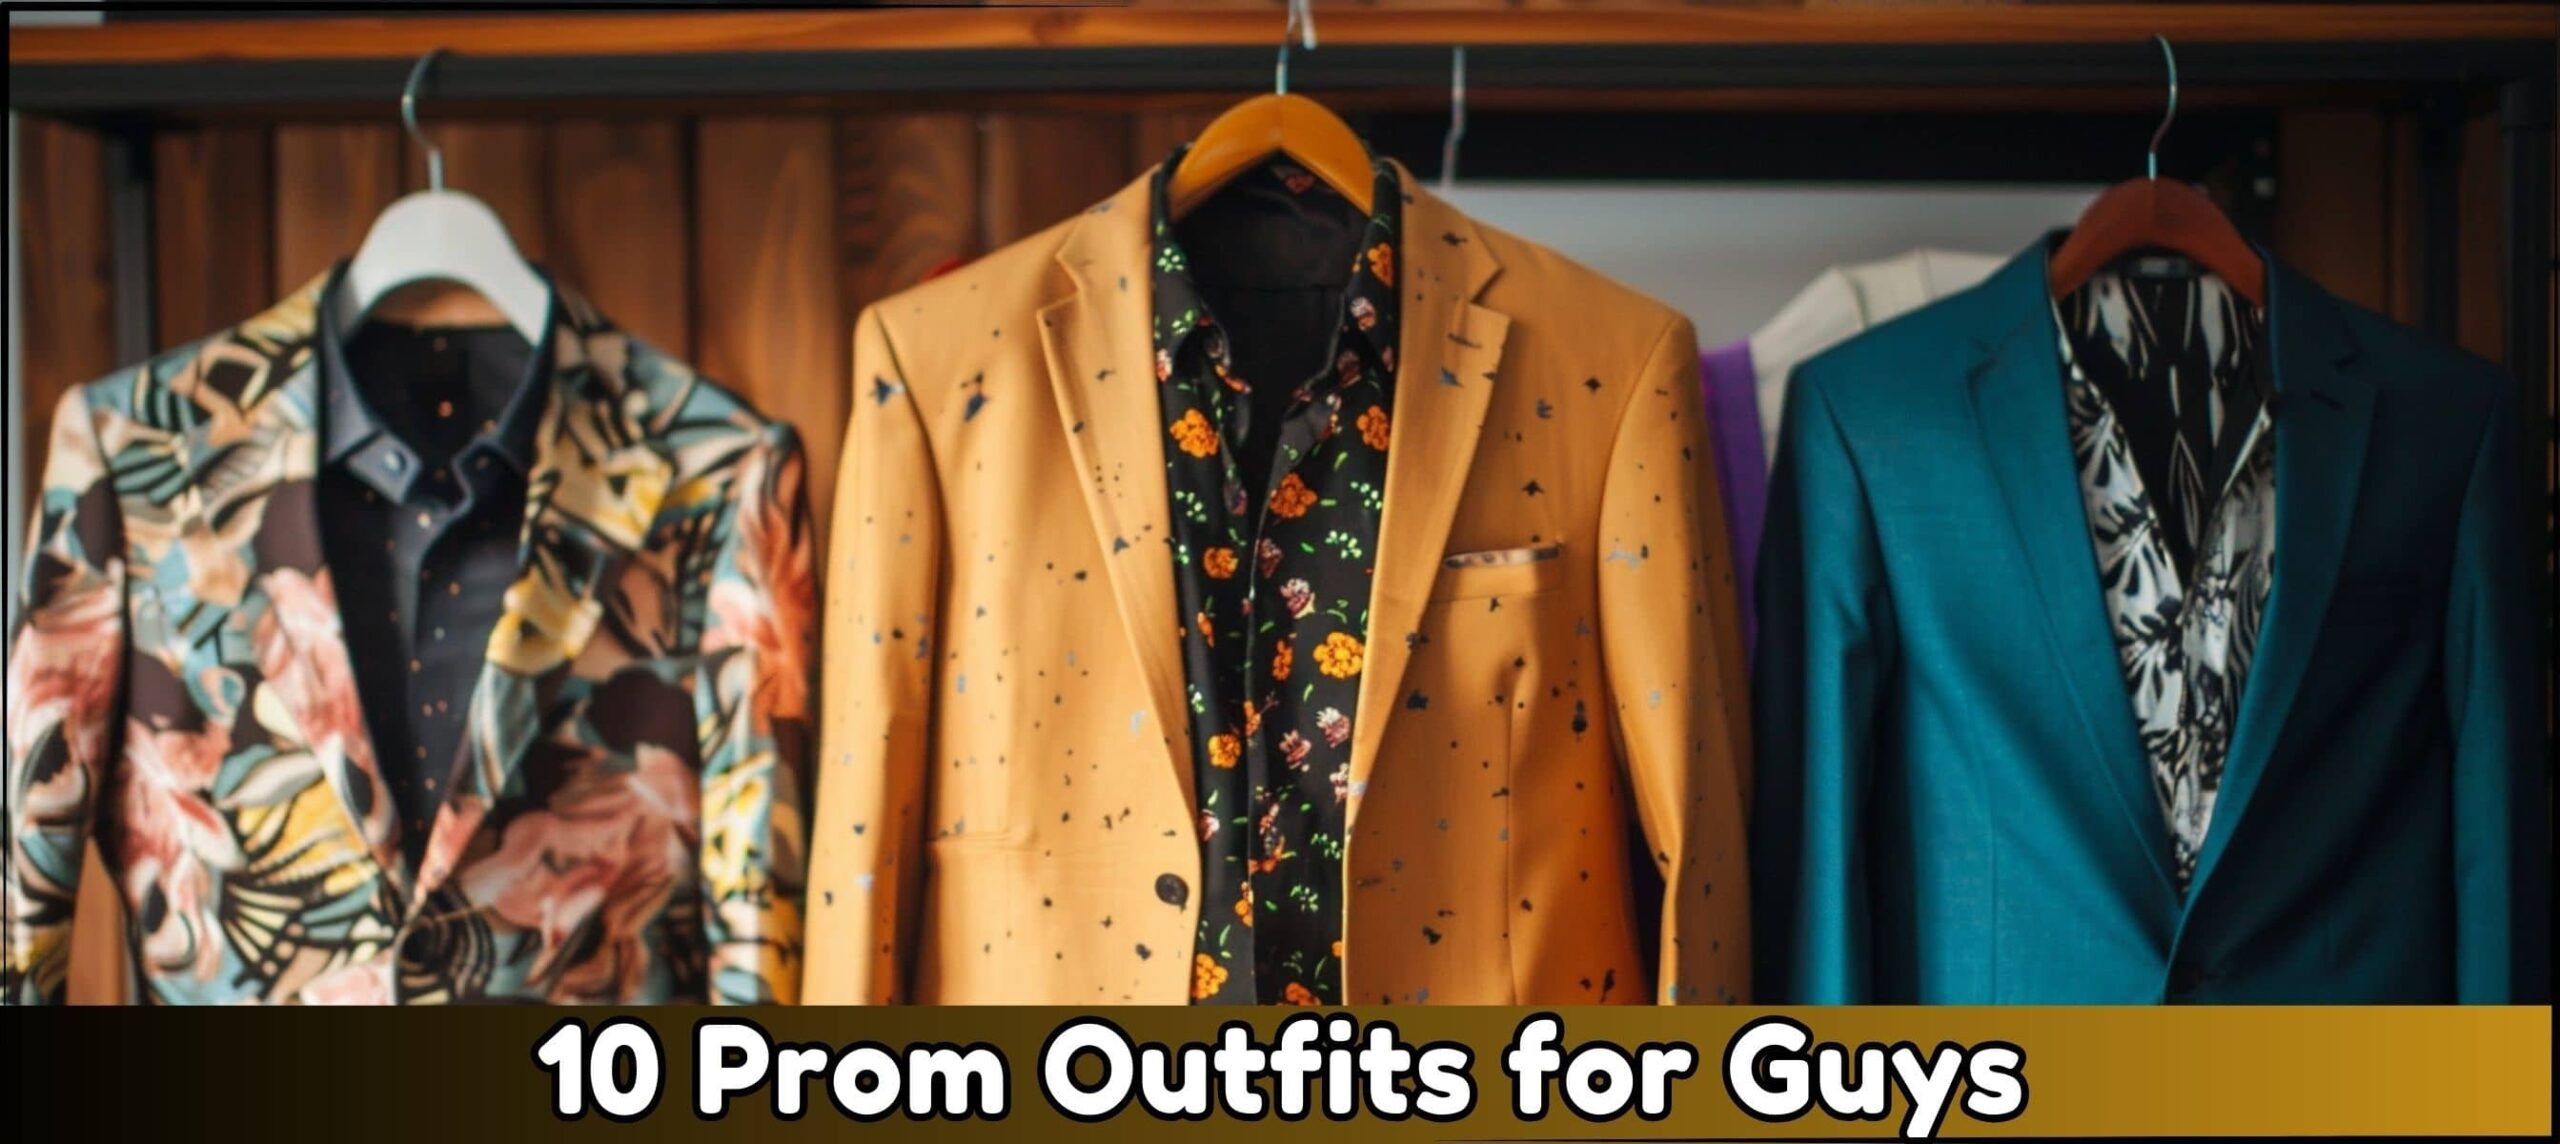 10 Prom Outfit Ideas for Men